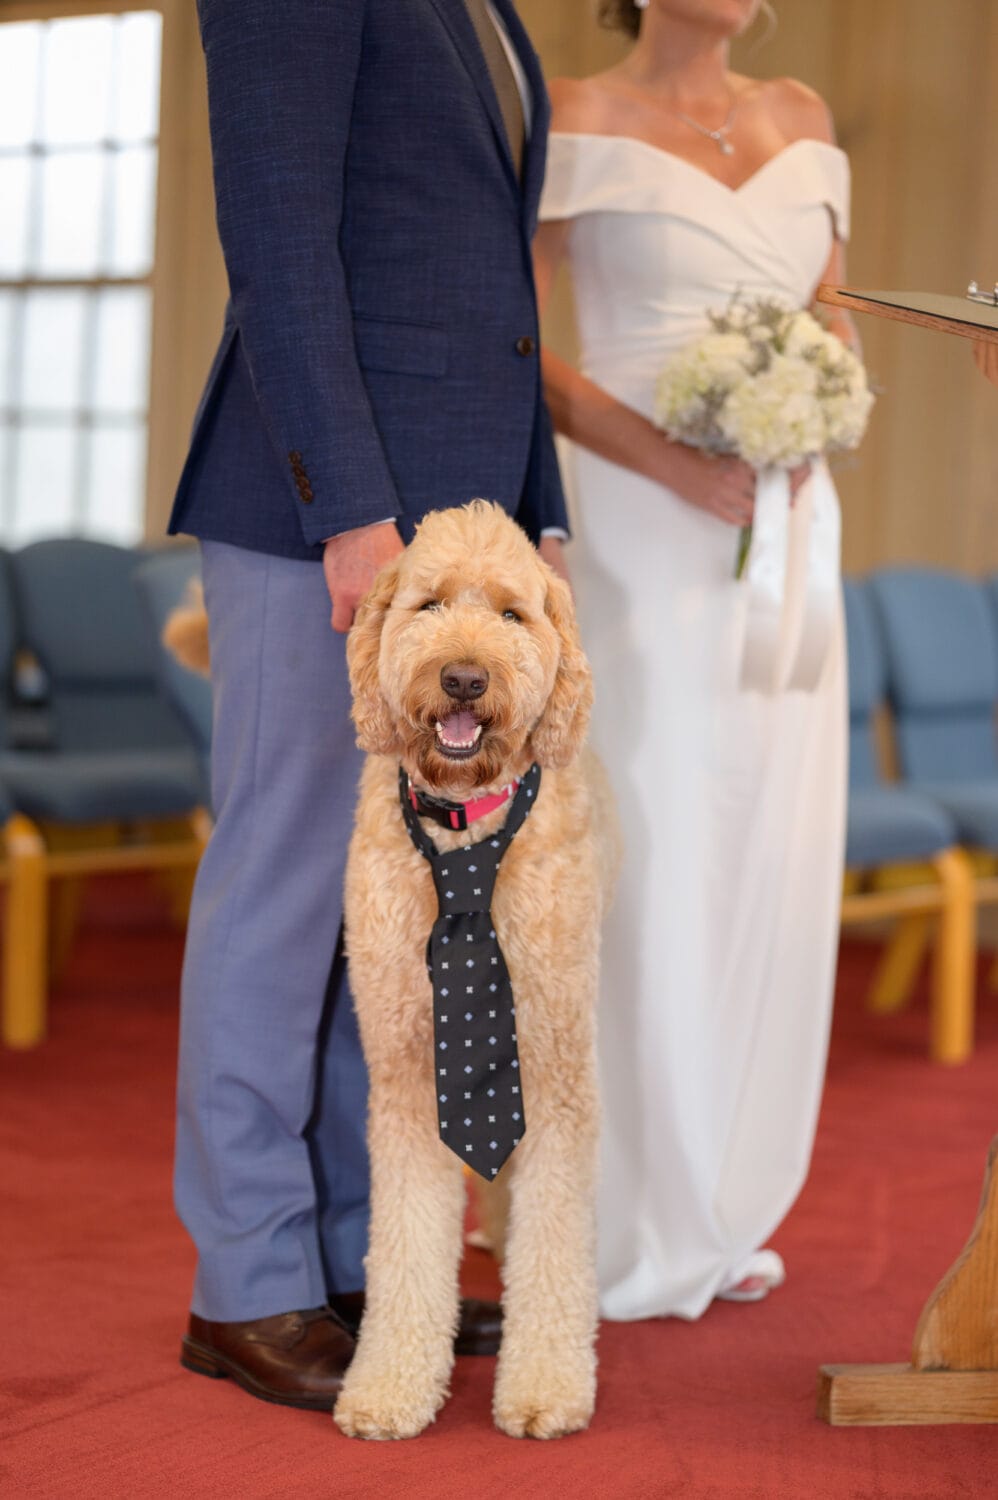 Dog mom and dad getting married with the pup in a cute tie for the wedding - Pawleys Island Chapel